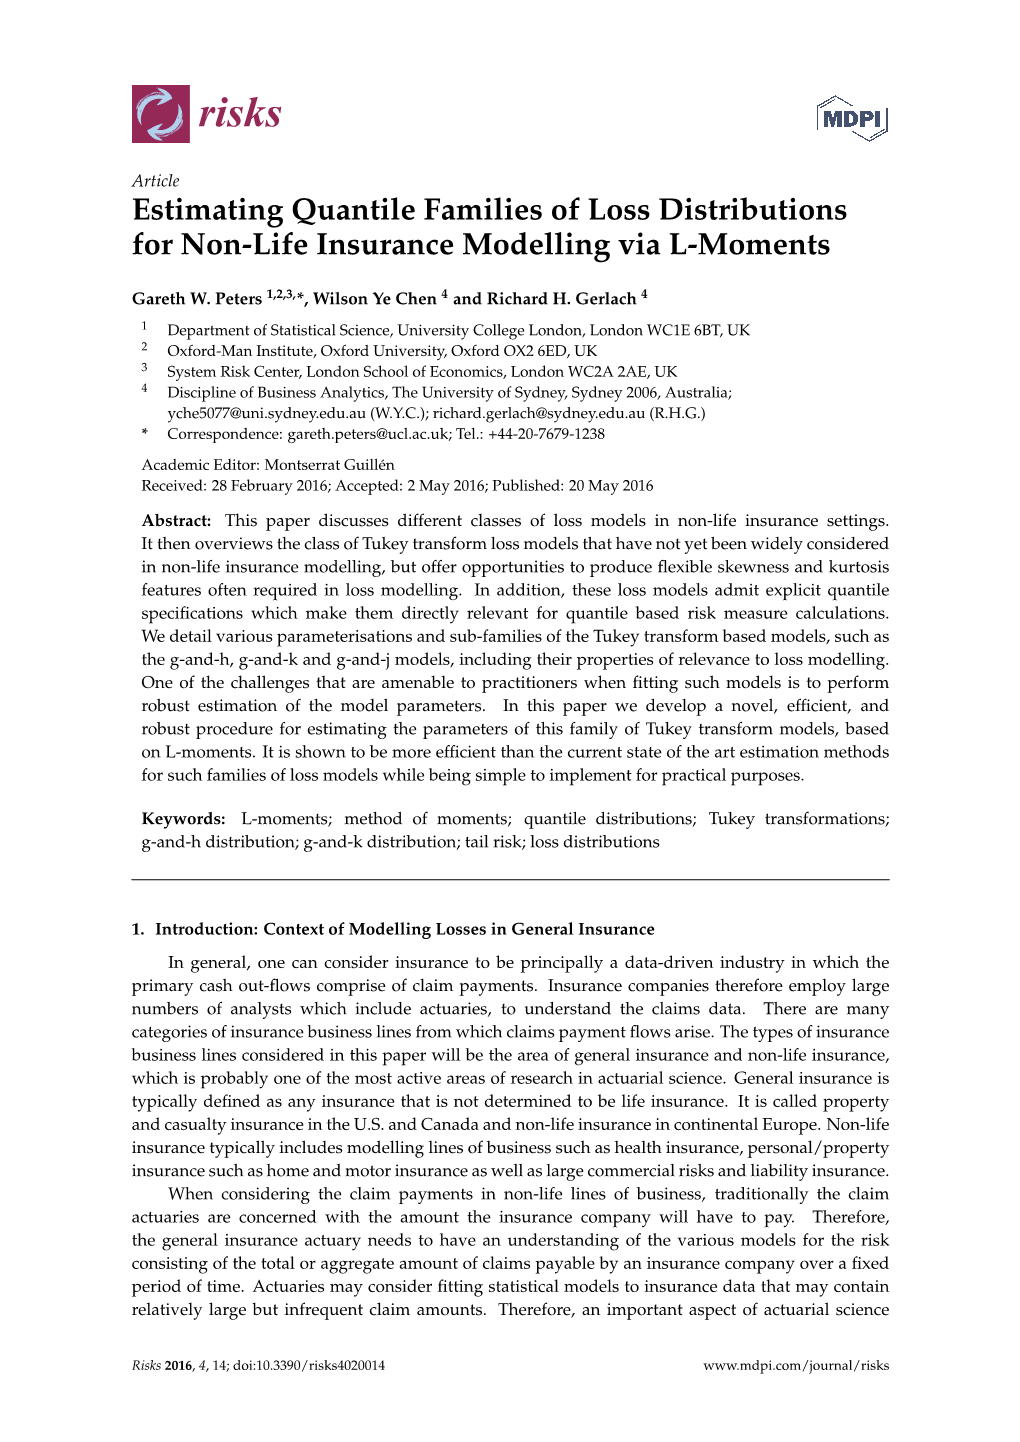 Estimating Quantile Families of Loss Distributions for Non-Life Insurance Modelling Via L-Moments